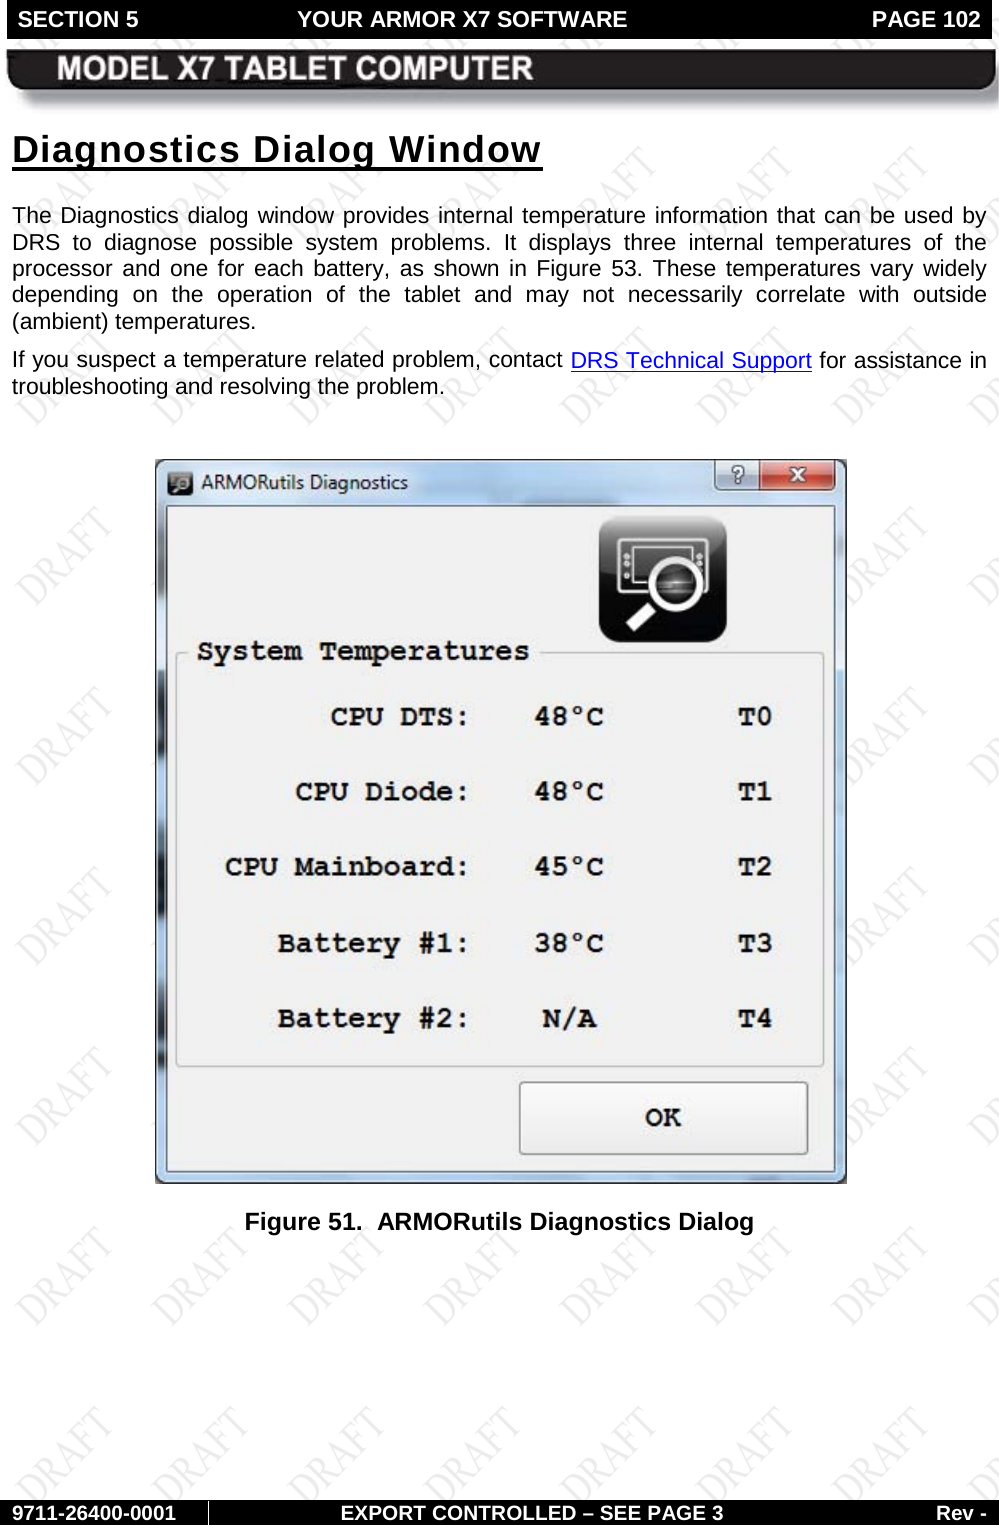 SECTION 5 YOUR ARMOR X7 SOFTWARE  PAGE 102        9711-26400-0001 EXPORT CONTROLLED – SEE PAGE 3 Rev - Diagnostics Dialog Window The Diagnostics dialog window provides internal temperature information that can be used by DRS to diagnose possible system problems. It displays  three  internal temperatures of the processor and one for each battery, as shown in Figure 53. These temperatures vary widely depending on the operation of the tablet and may not necessarily correlate with outside (ambient) temperatures.  If you suspect a temperature related problem, contact DRS Technical Support for assistance in troubleshooting and resolving the problem.    Figure 51.  ARMORutils Diagnostics Dialog    